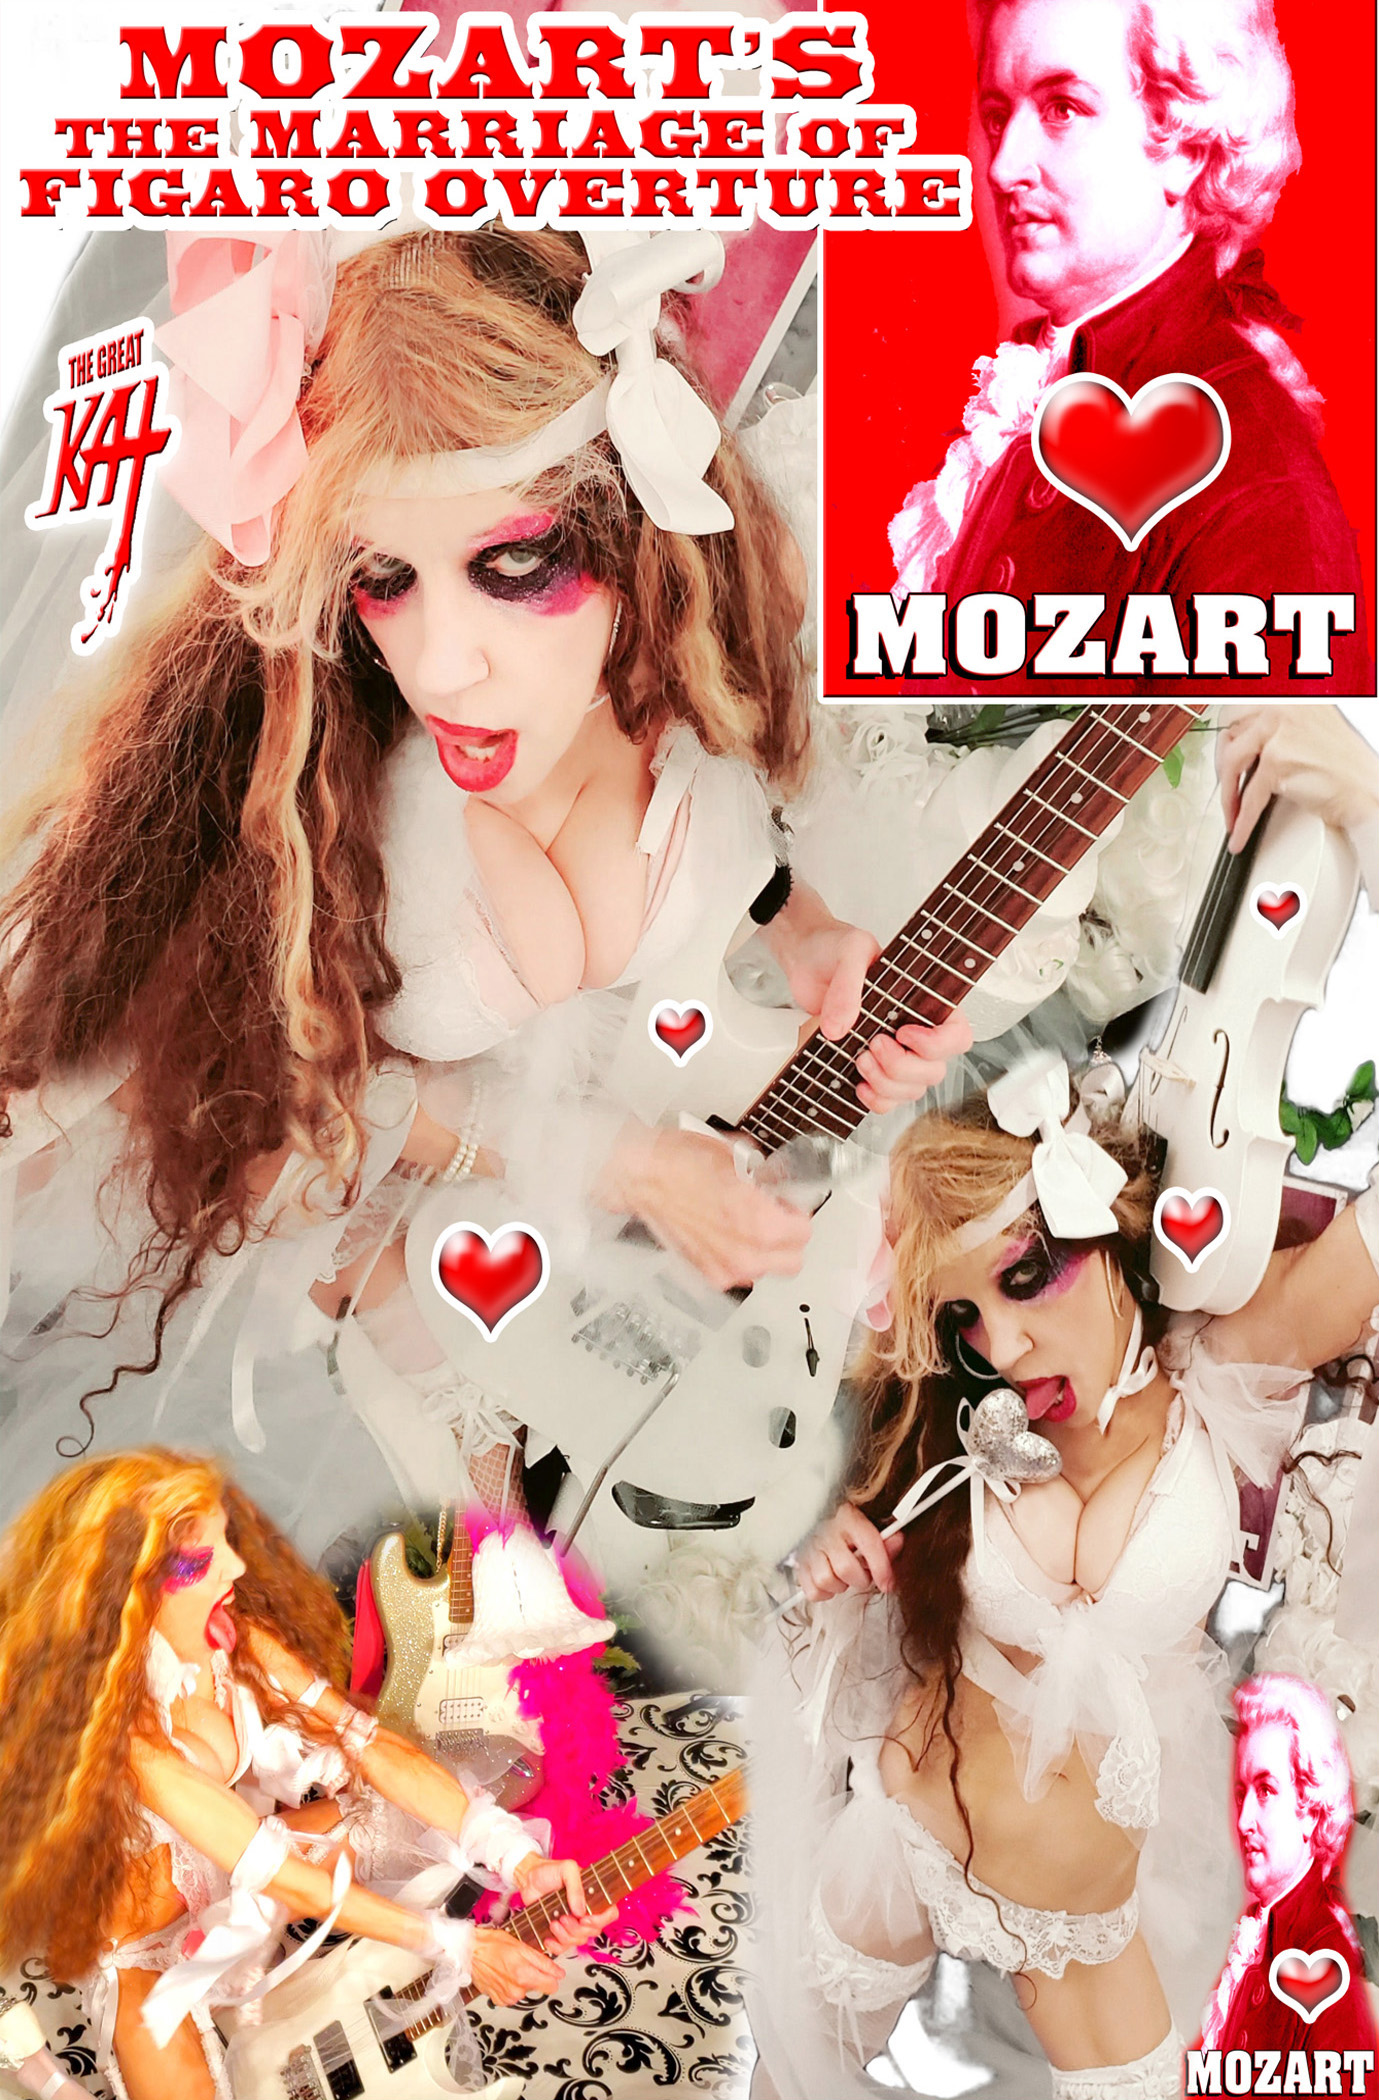 MIDWEST BOOK REVIEW'S Andy Jordan's Rave Review of The Great Kat's new MOZART'S "THE MARRIAGE OF FIGARO OVERTURE"! "The Great Kat (a.k.a. "The World's Fastest Guitar Shredder") presents an eye-popping, jaw-dropping, utterly sensational rendition of Mozart's The Marriage of Figaro Overture (2 min.), a music video on DVD that demonstrates her brilliant guitar shredding skills."